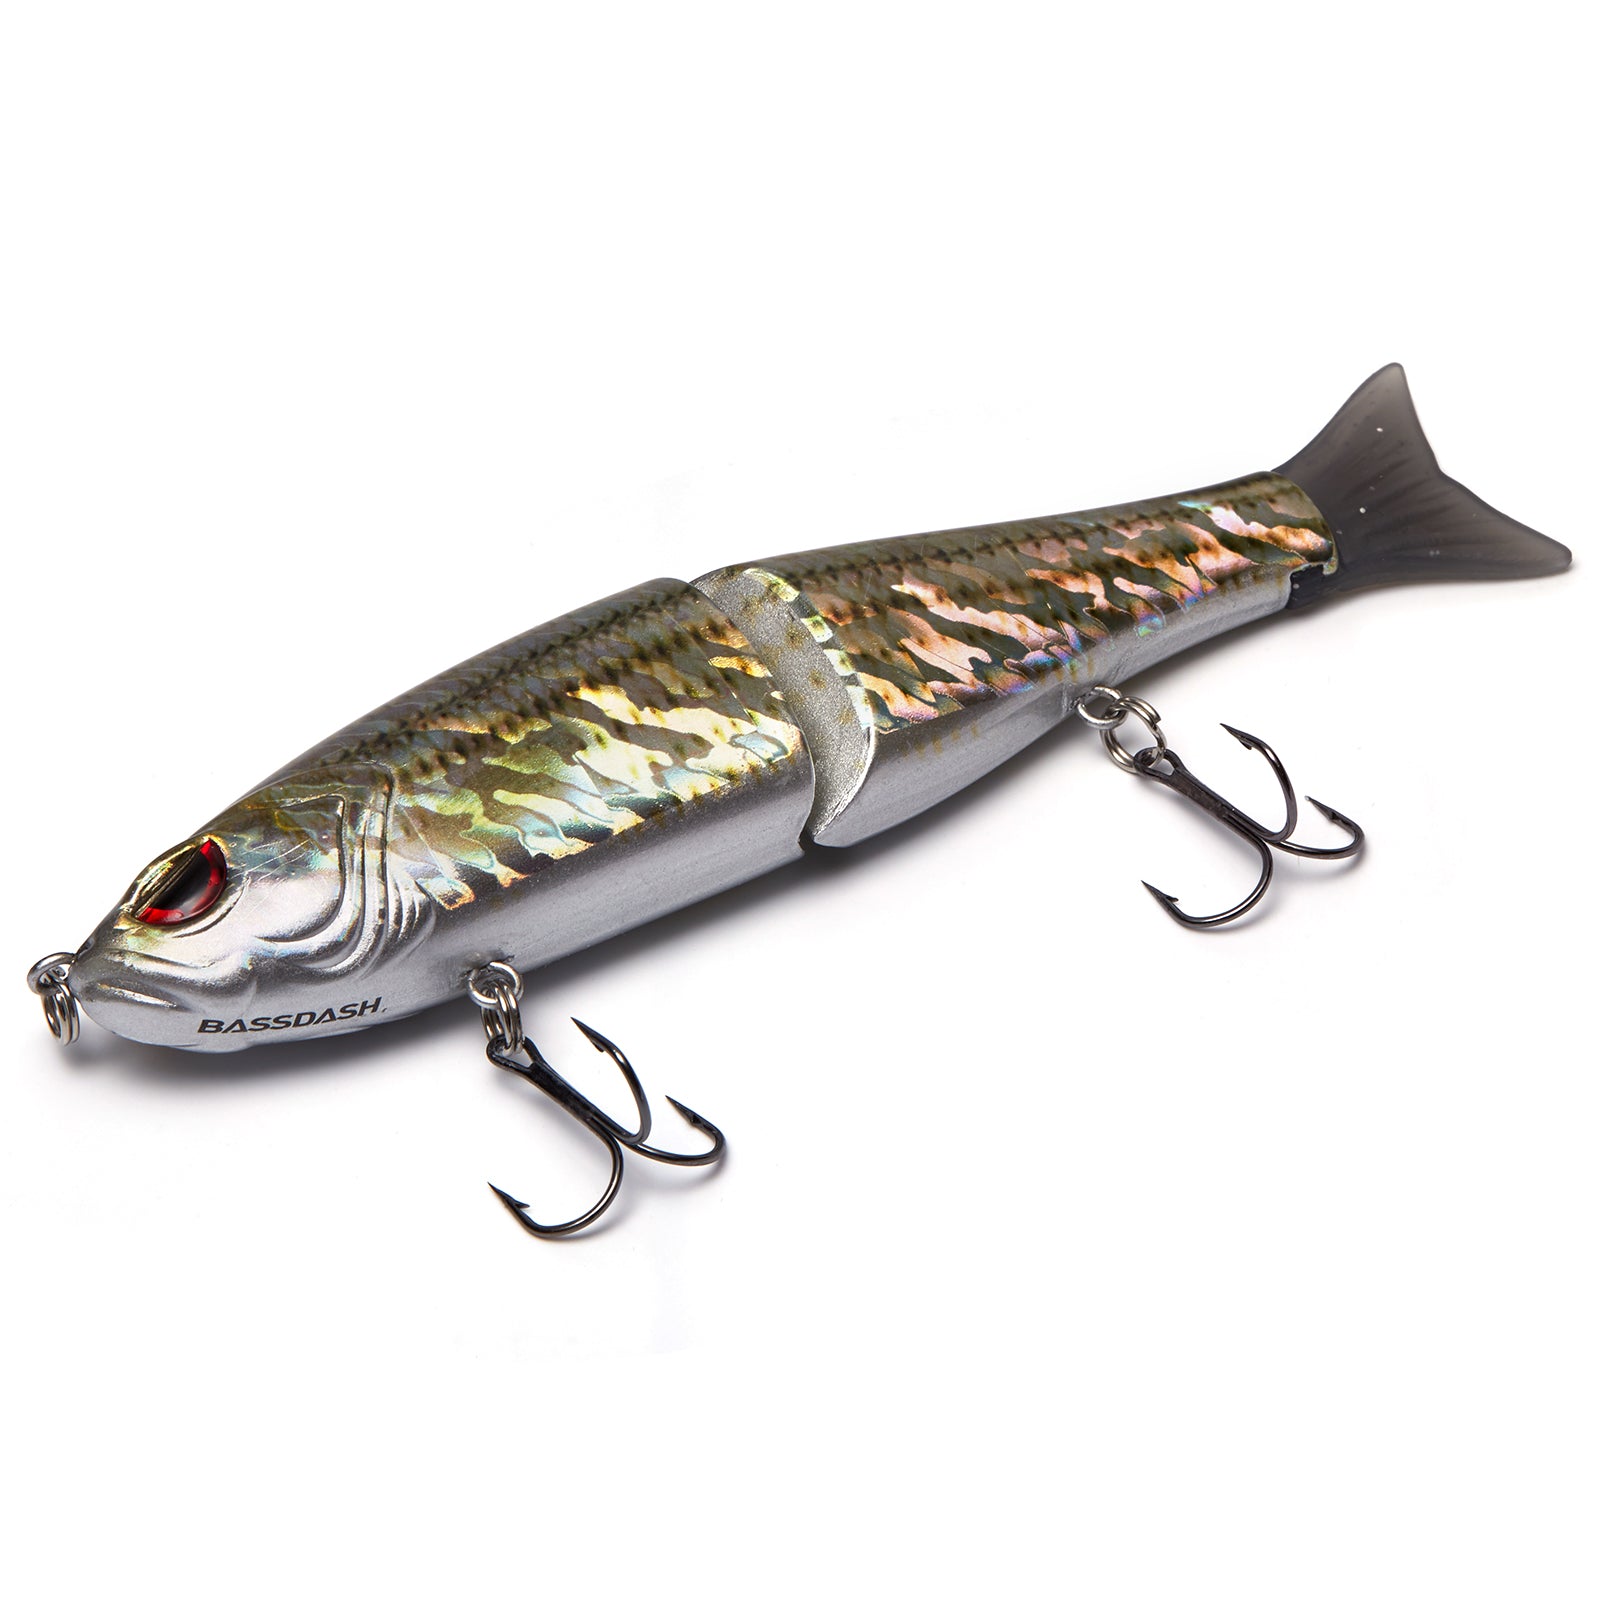 Tackle House Sinking Shad 70mm 13g Glide Bait Used Lures Fishing